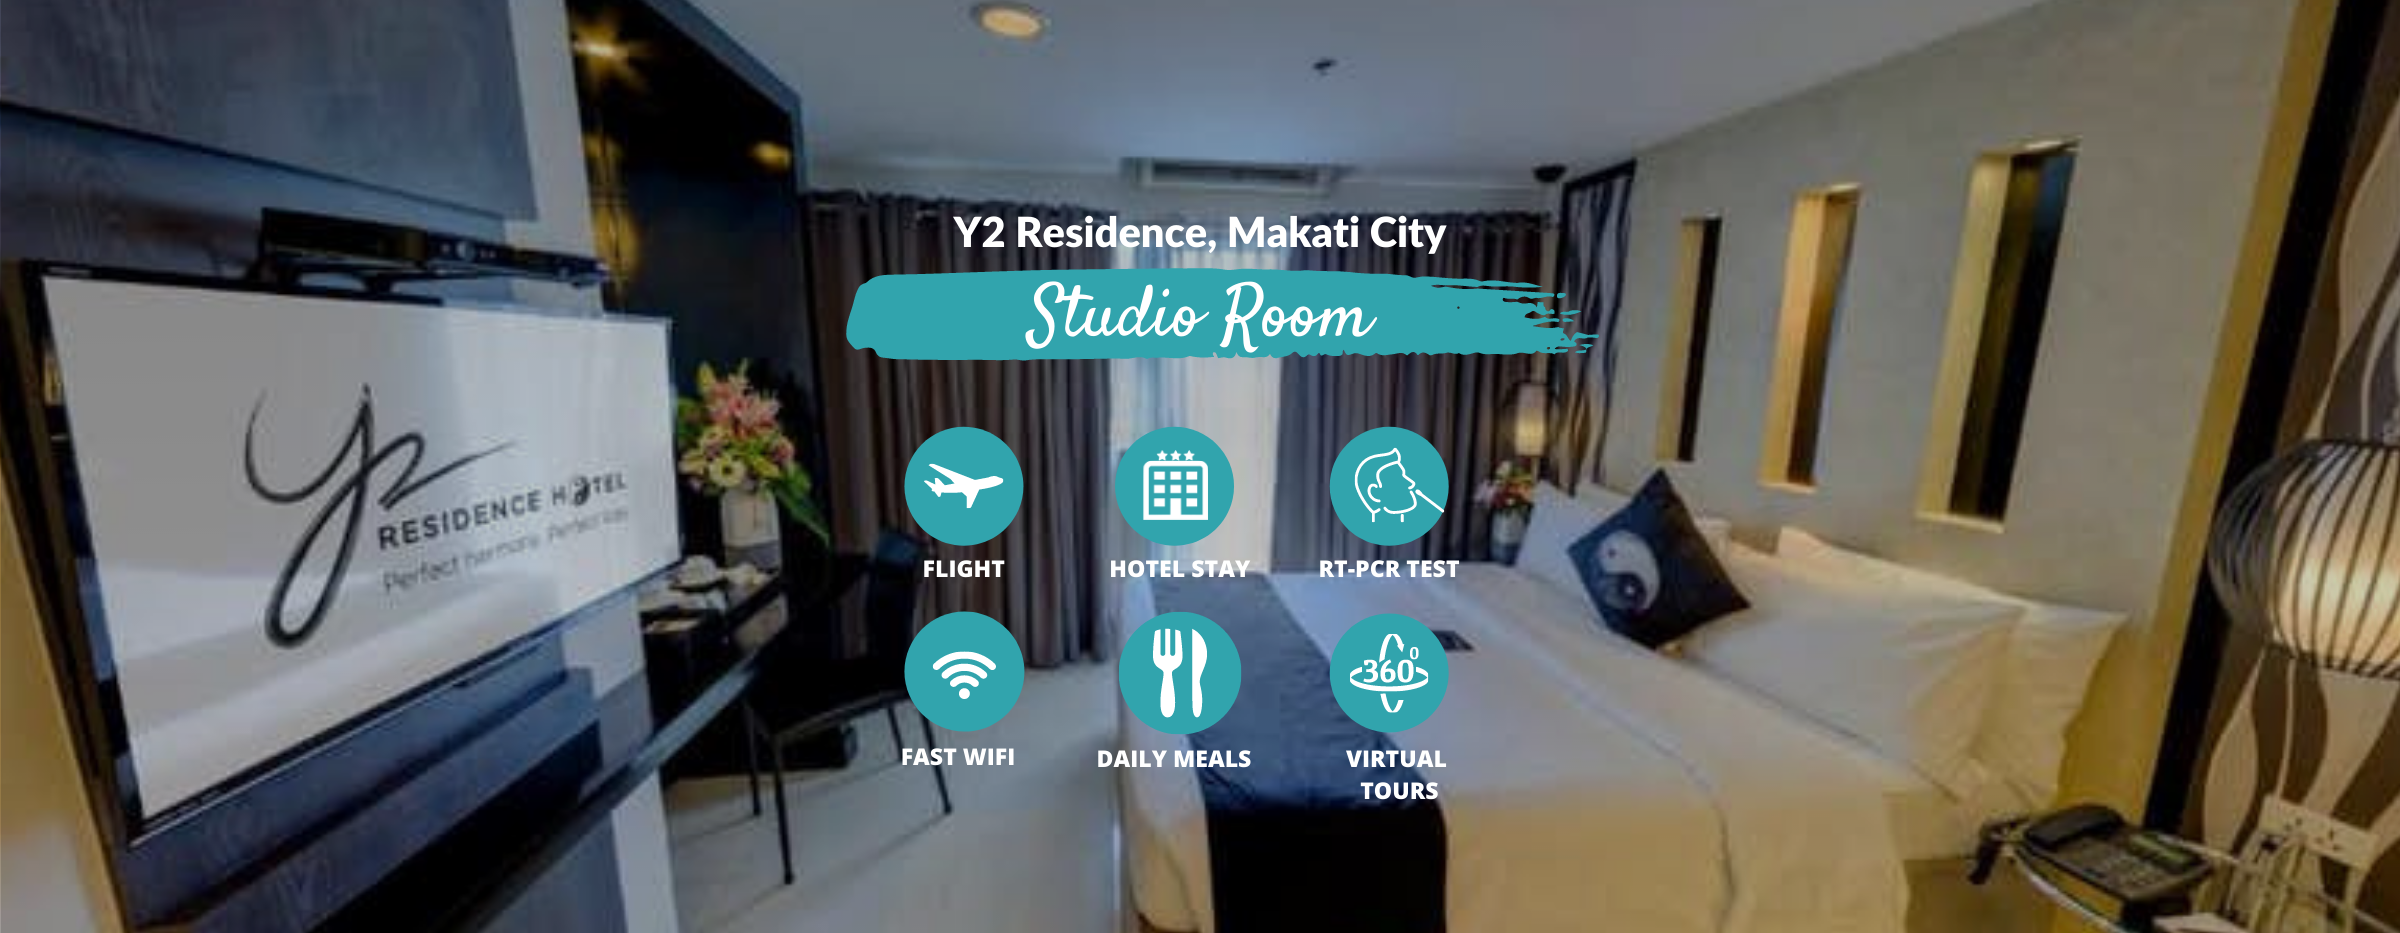 Manila Quarantine from Vancouver at Y2 Residence with Philippine Airlines, Meals & Virtual Tours